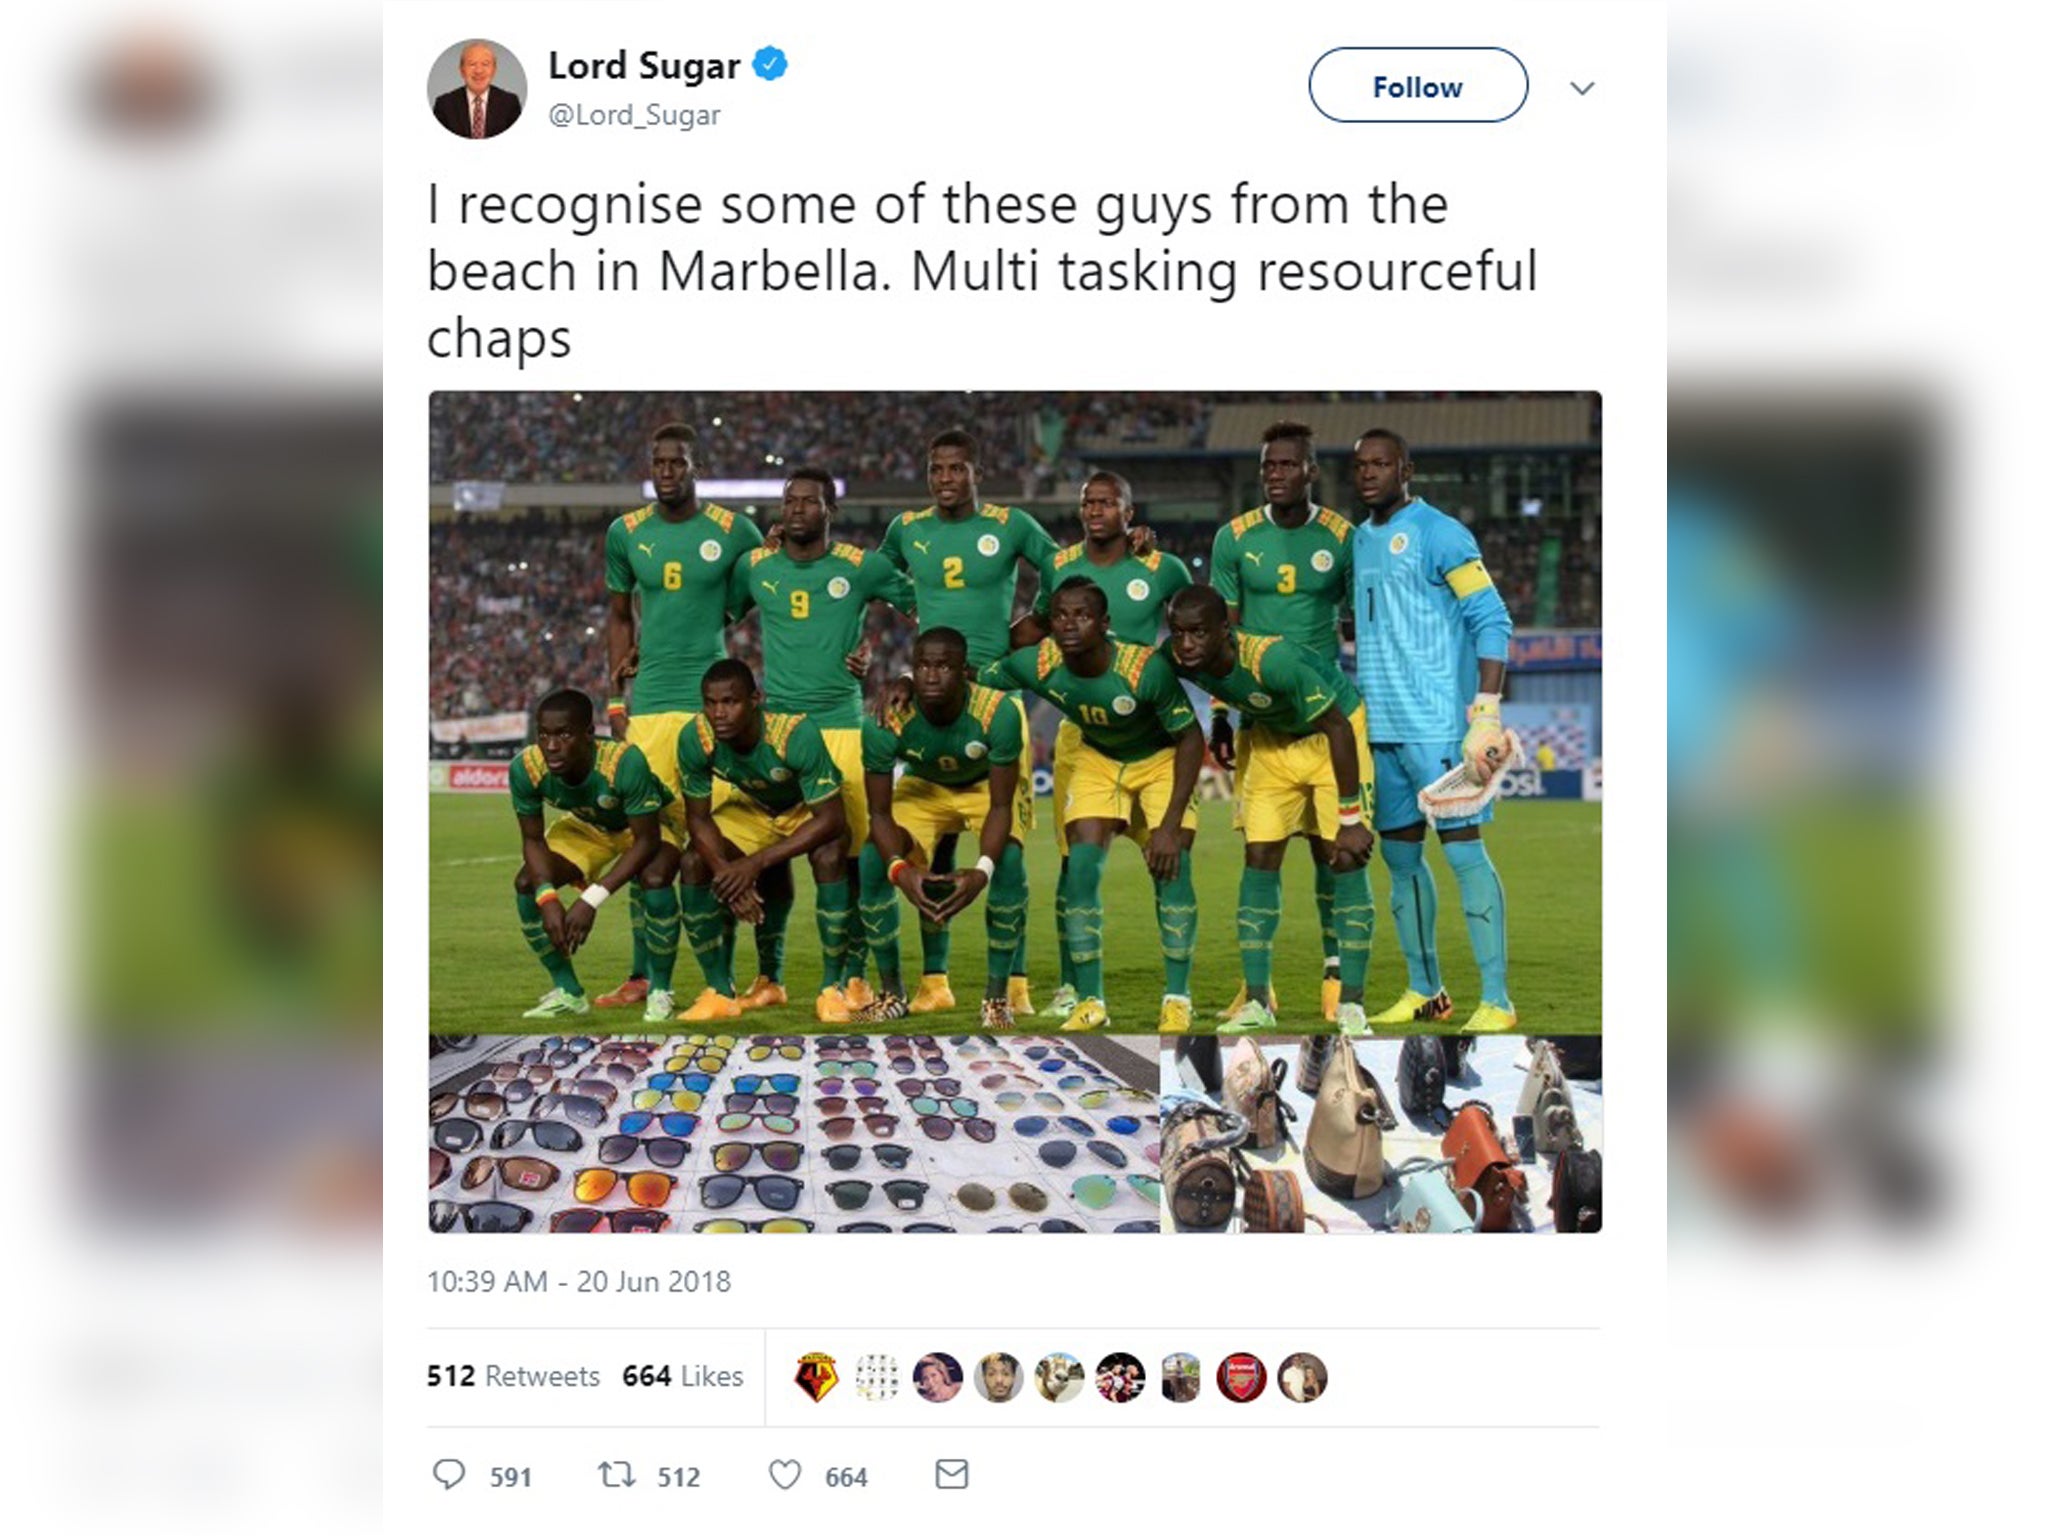 Alan Sugar’s tweet, which he later deleted